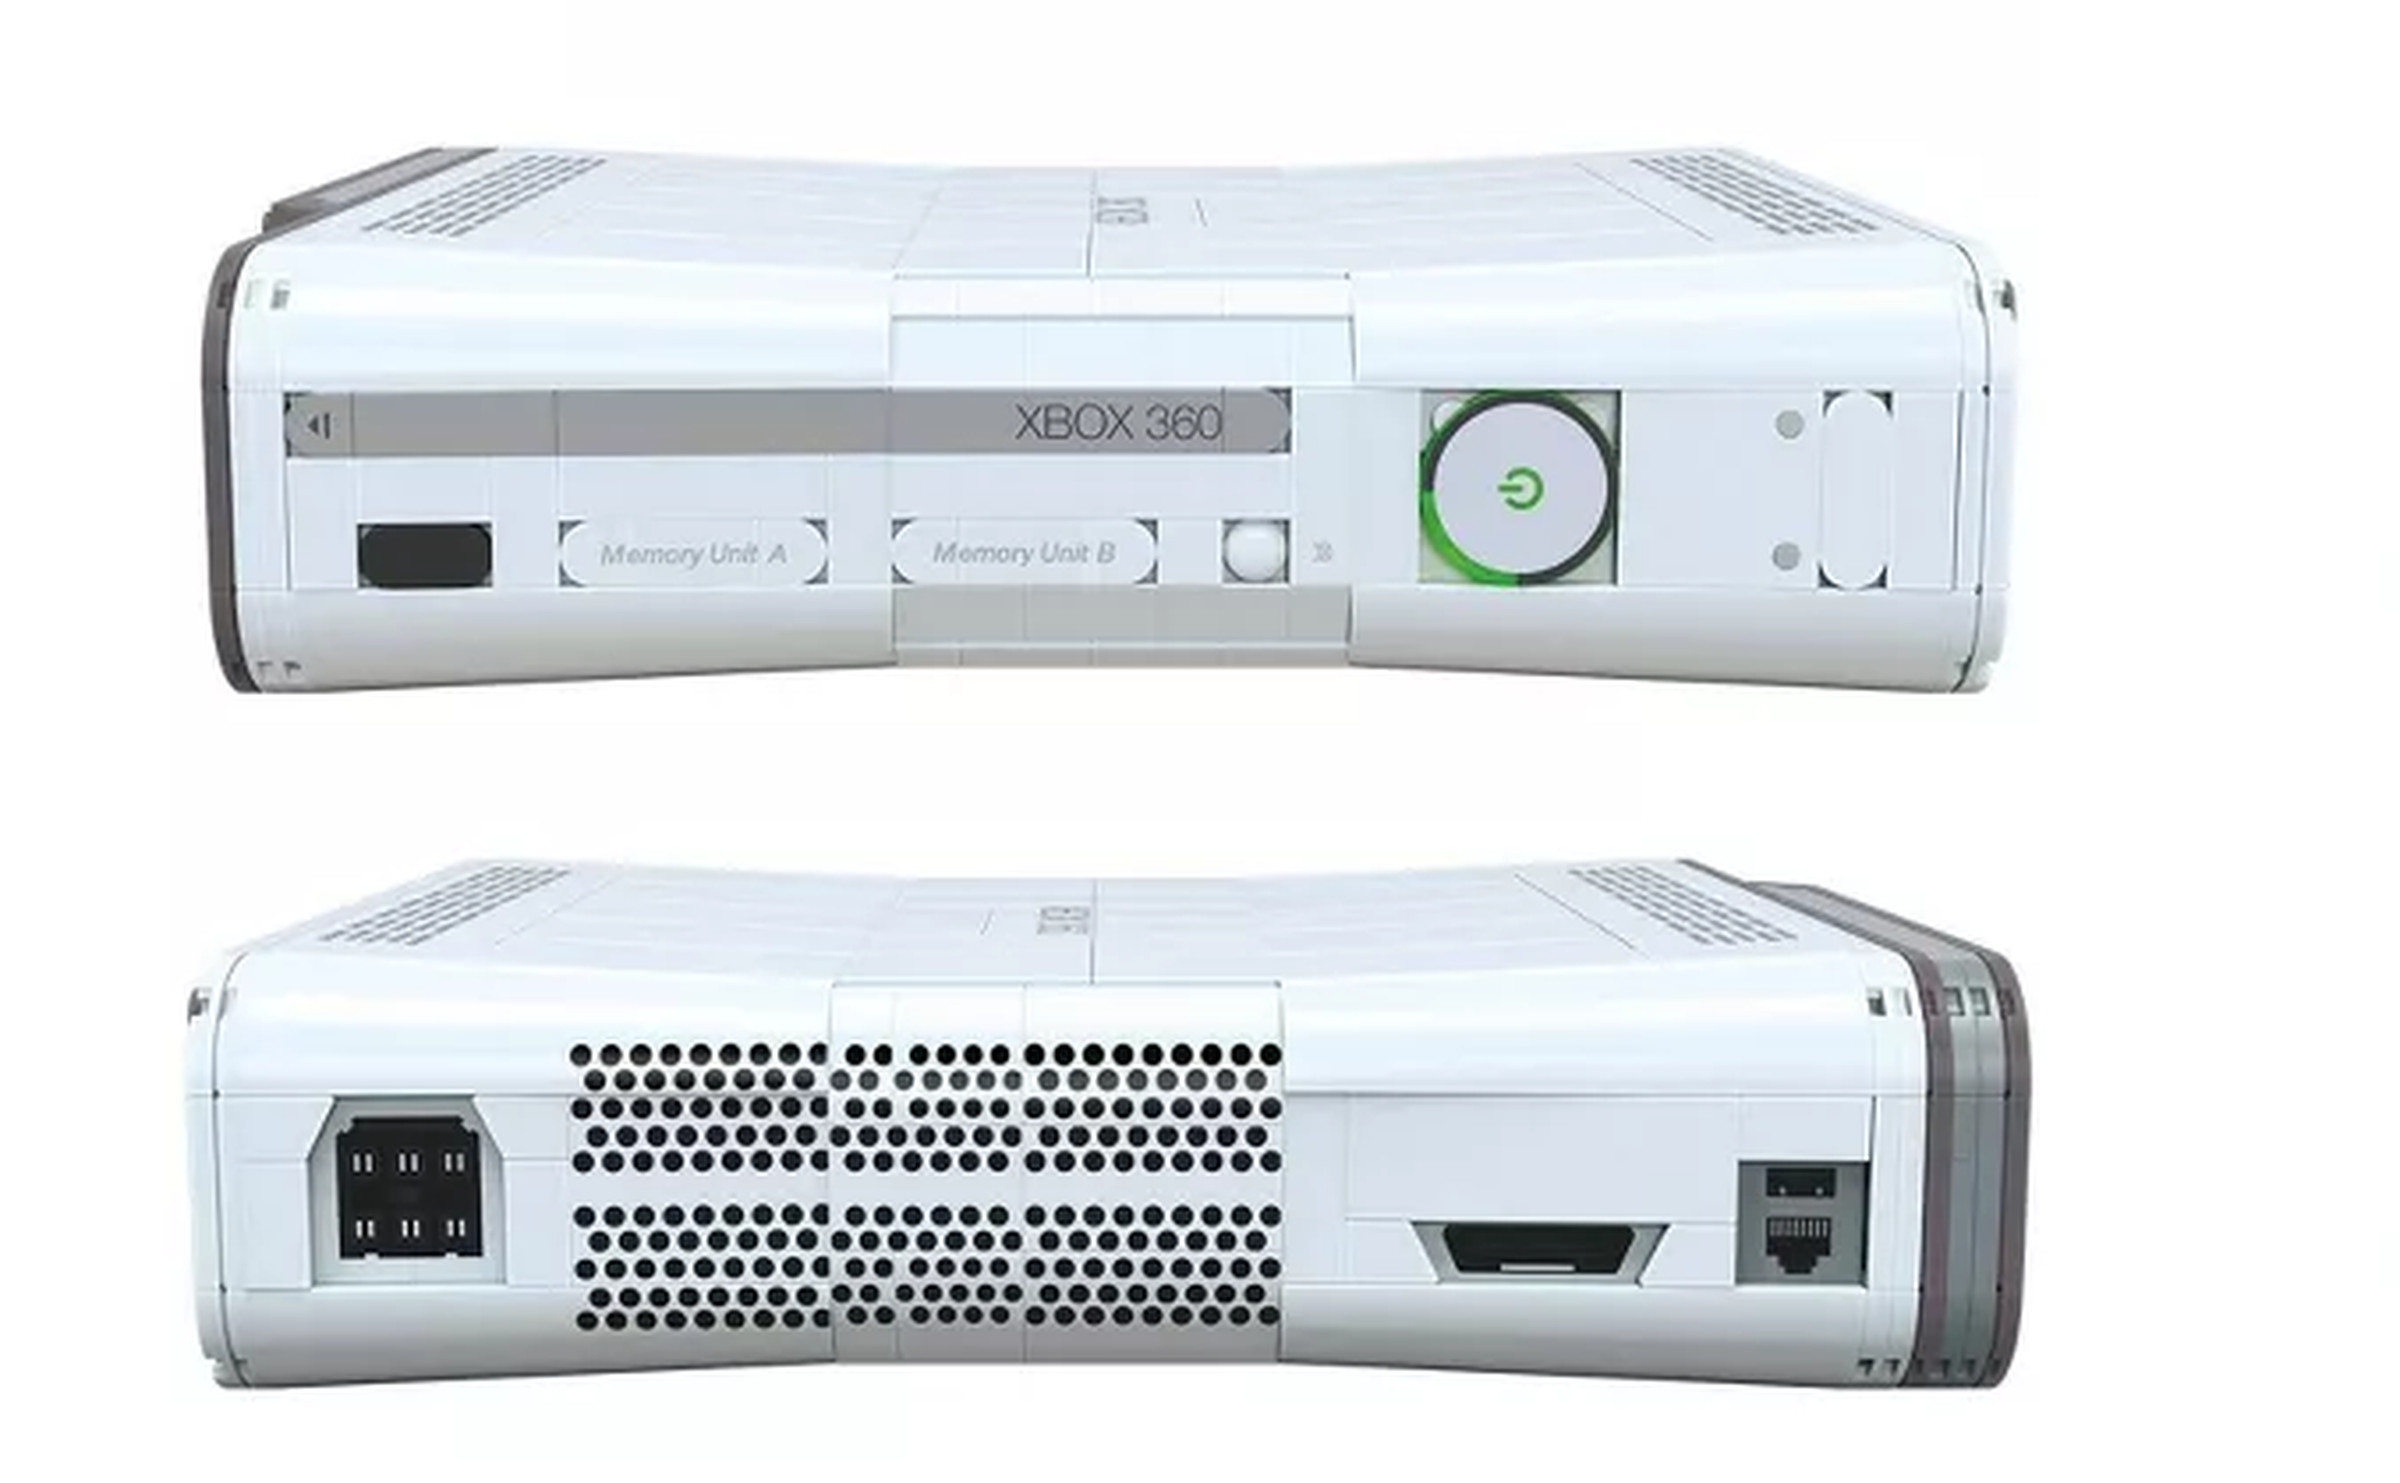 Screenshot of Mega’s Xbox 360 replica featuring the front and back of the console including the indicator light, ethernet and HDMI ports, and vent holes.